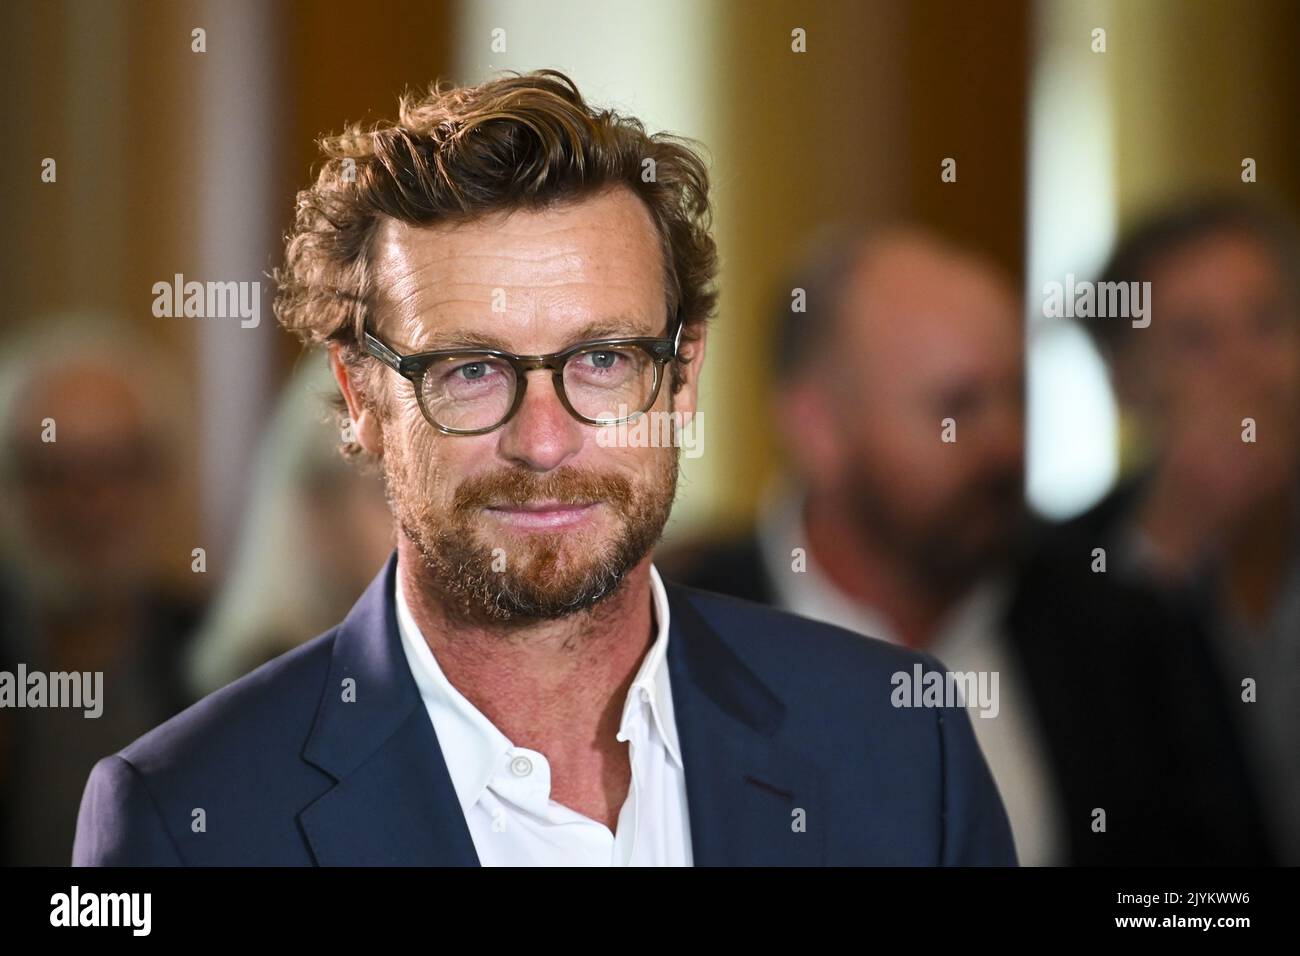 Australian actor Simon Baker speaks to the media during a press conference  at Parliament House in Canberra, Tuesday, March 16, 2021. (AAP Image/Lukas  Coch) NO ARCHIVING ** STRICTLY EDITORIAL USE ONLY **